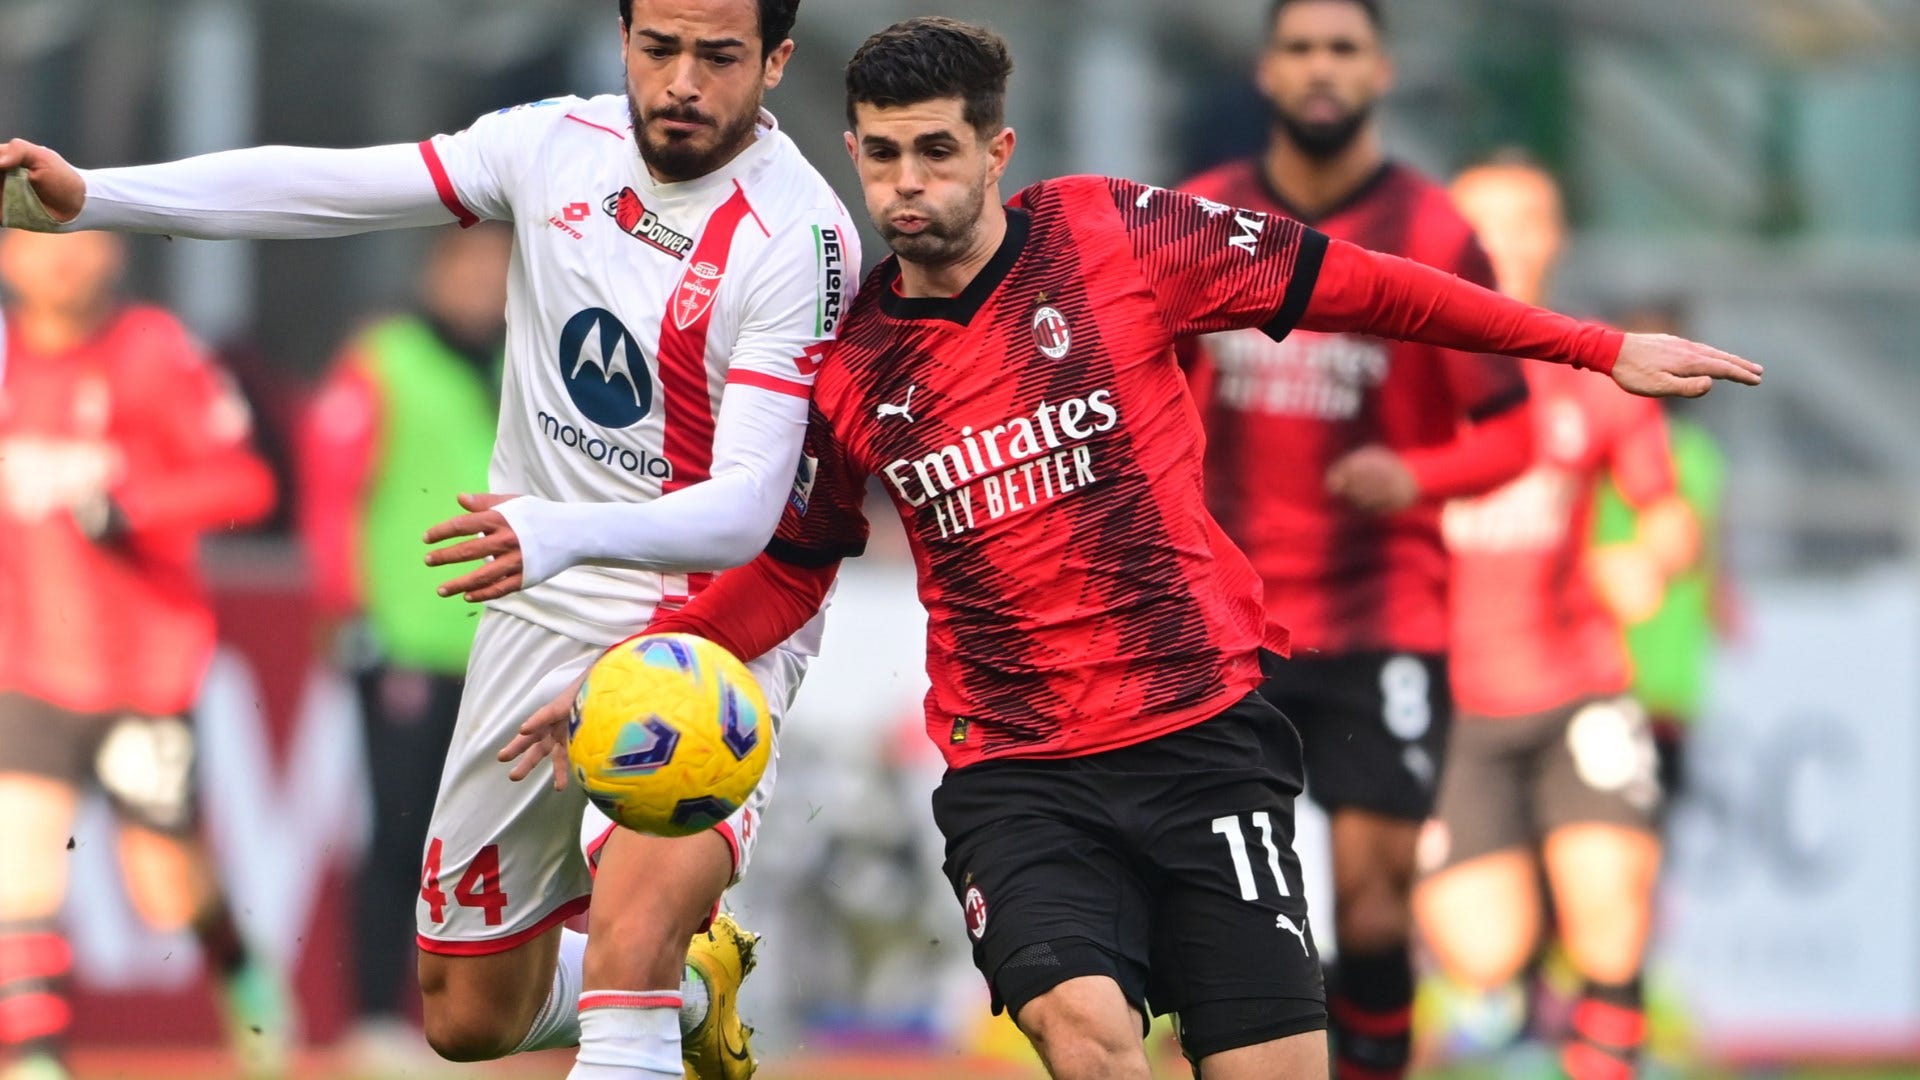 Milan ease to 3-0 win over Monza